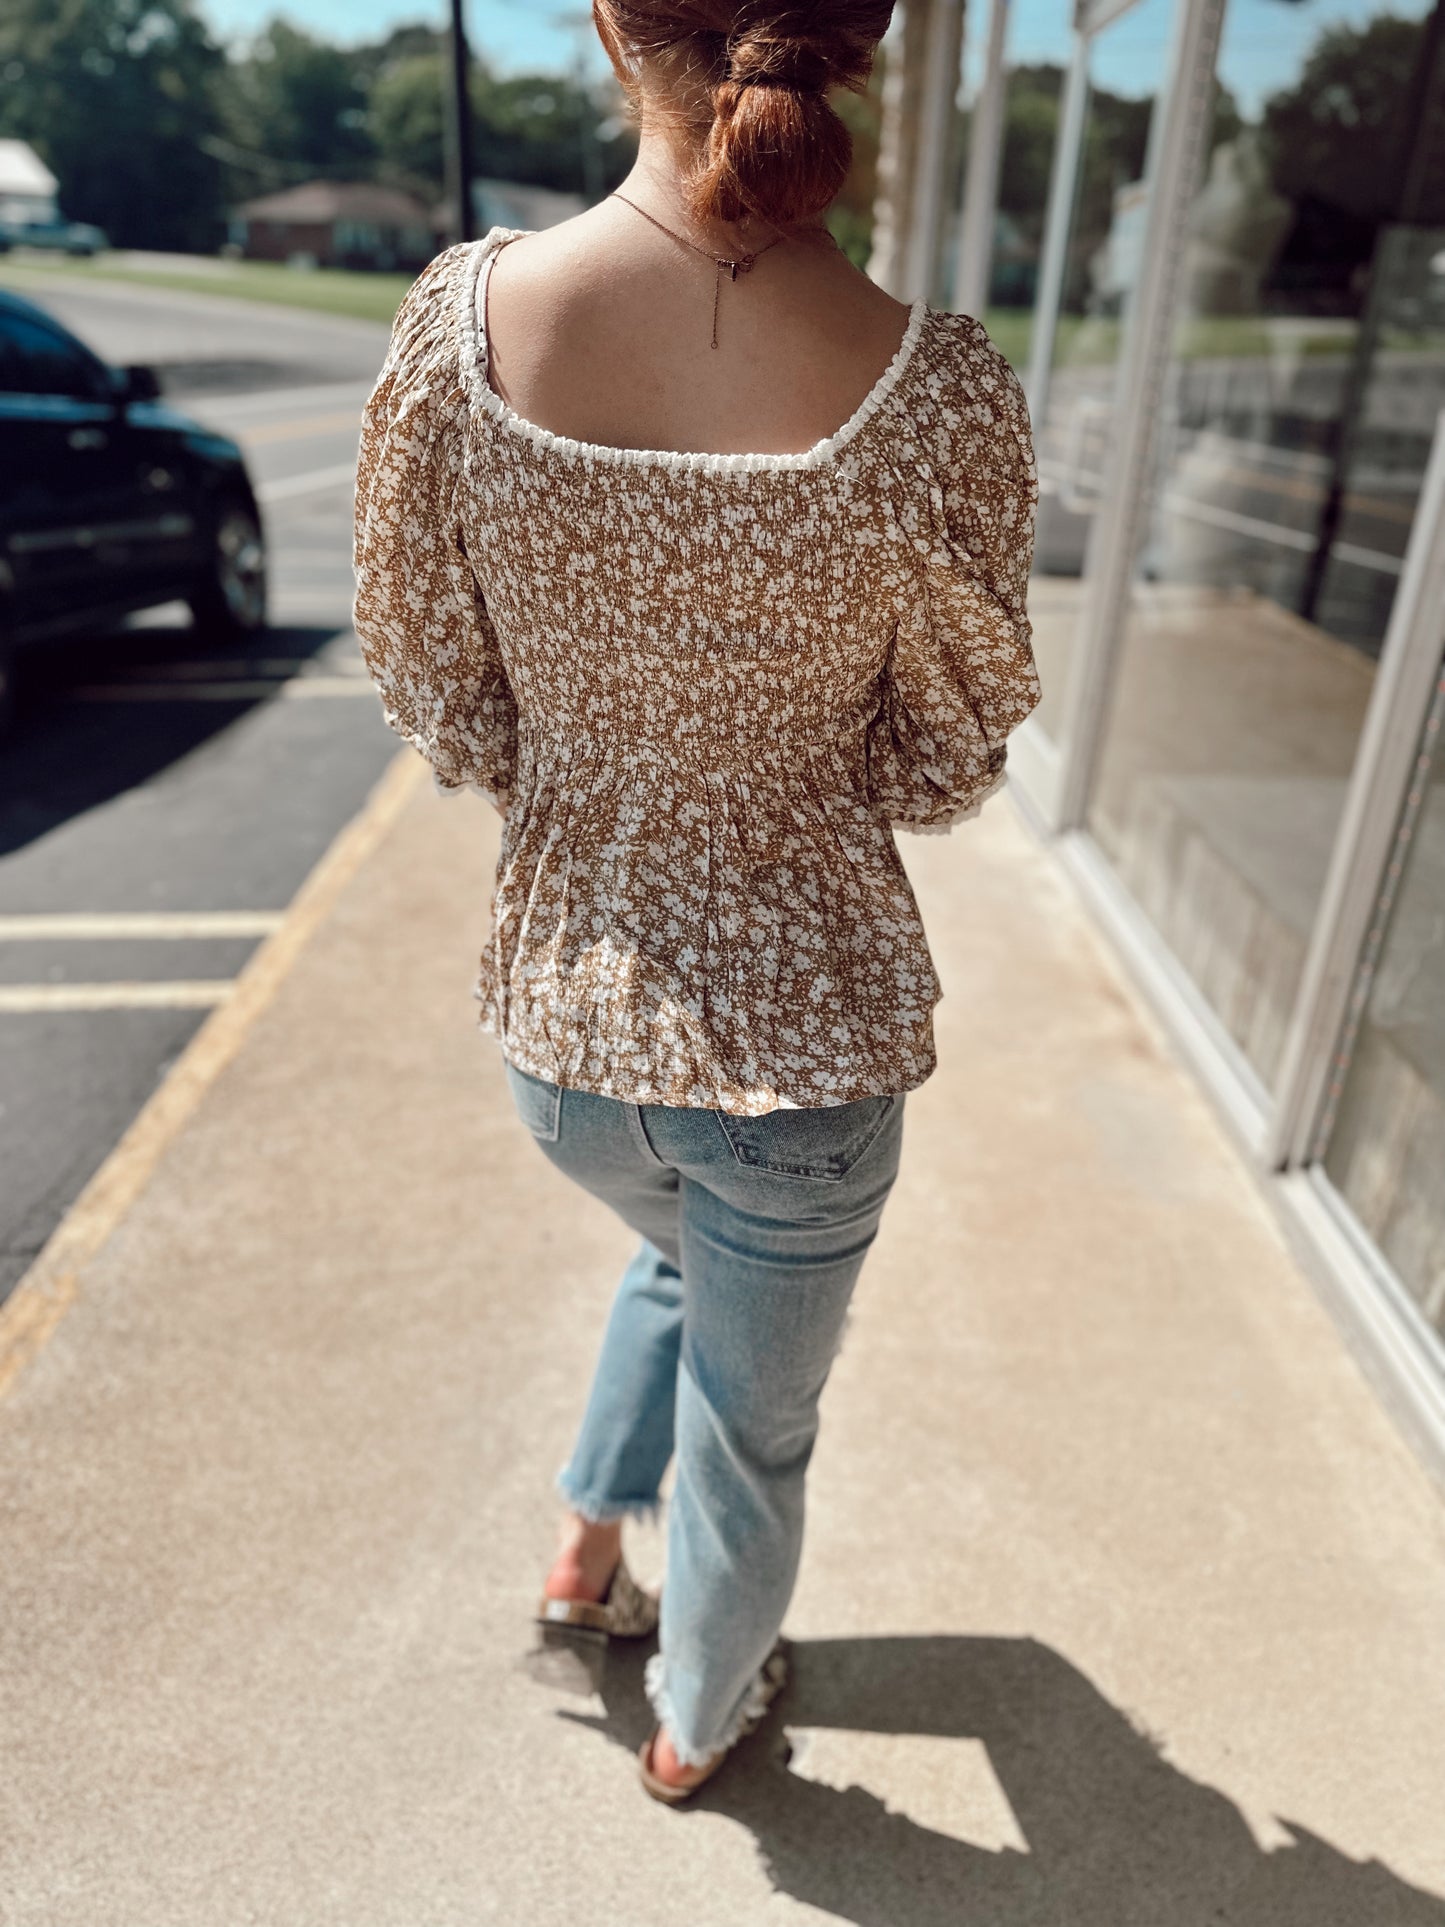 Find Your Way Floral Blouse - 2 Colors